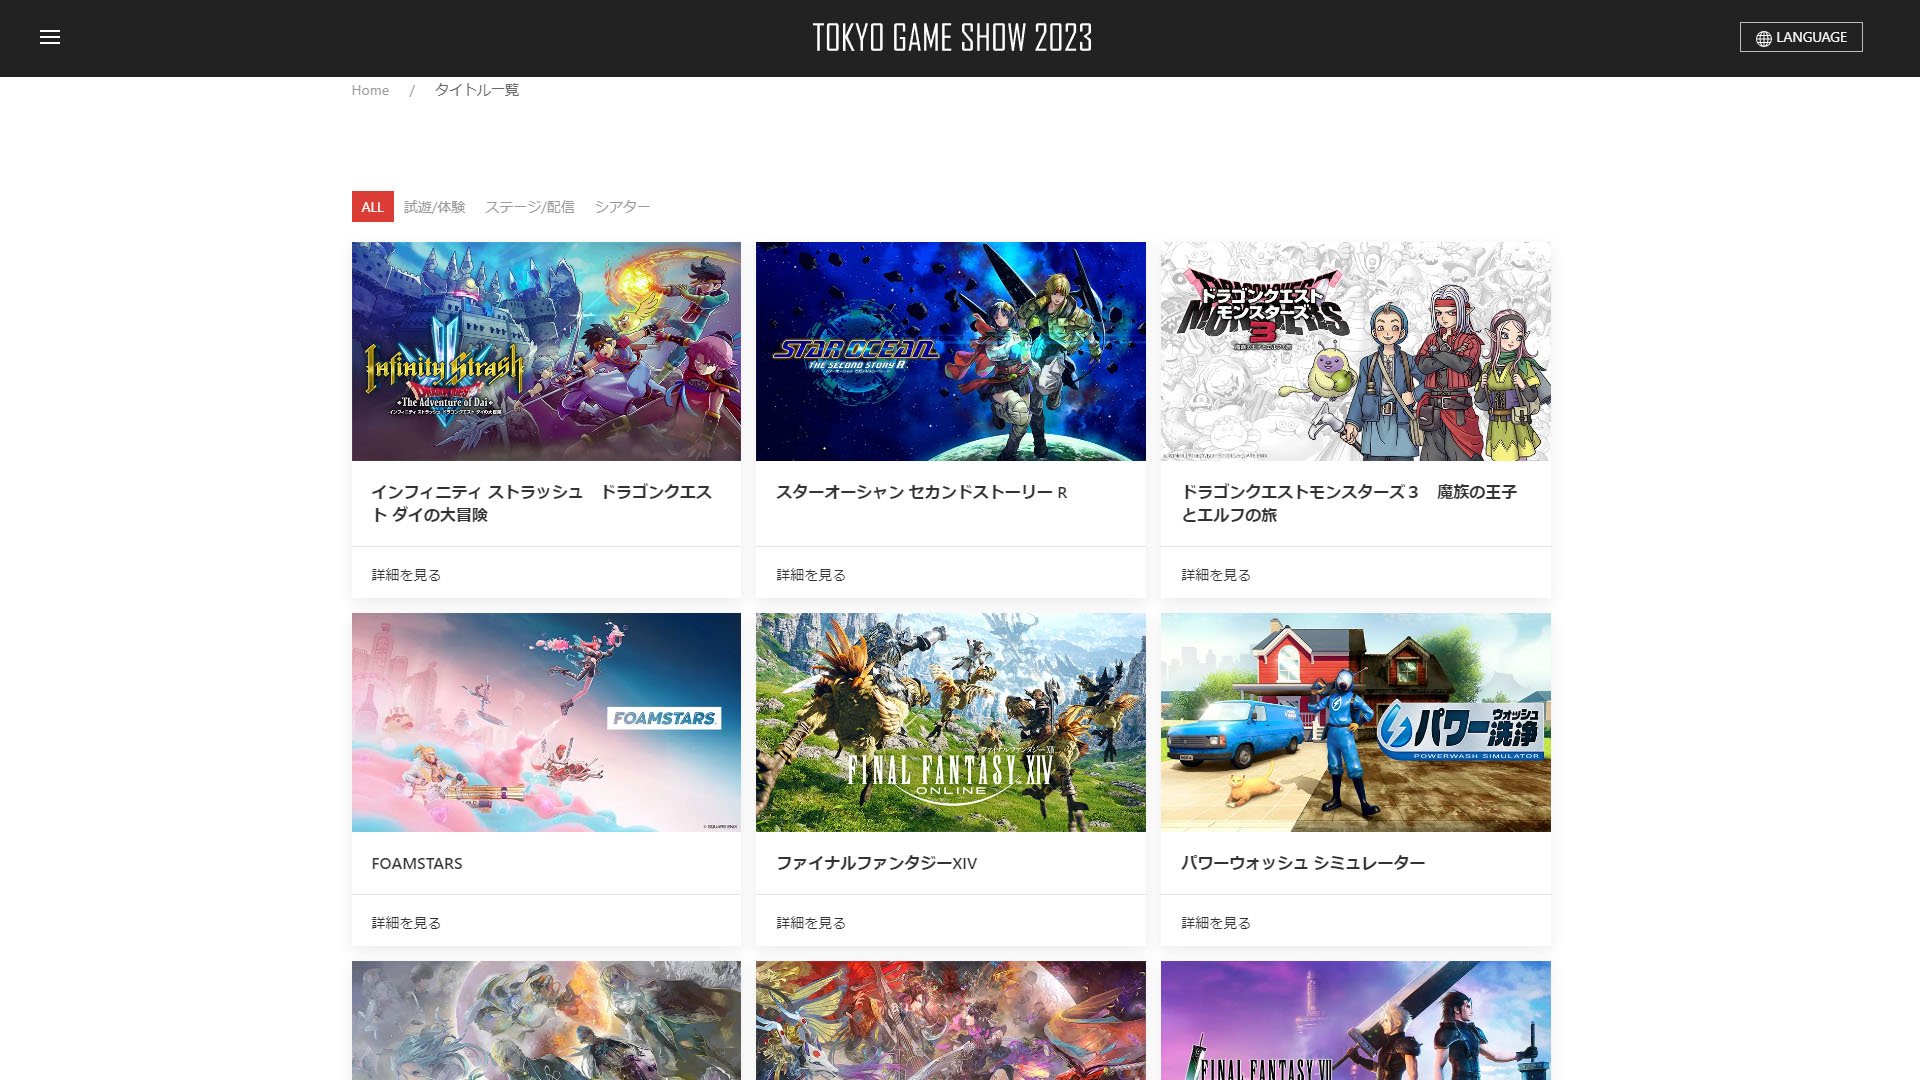 Xbox Digital Broadcast at TGS 2023 Will Provide Updates on Xbox